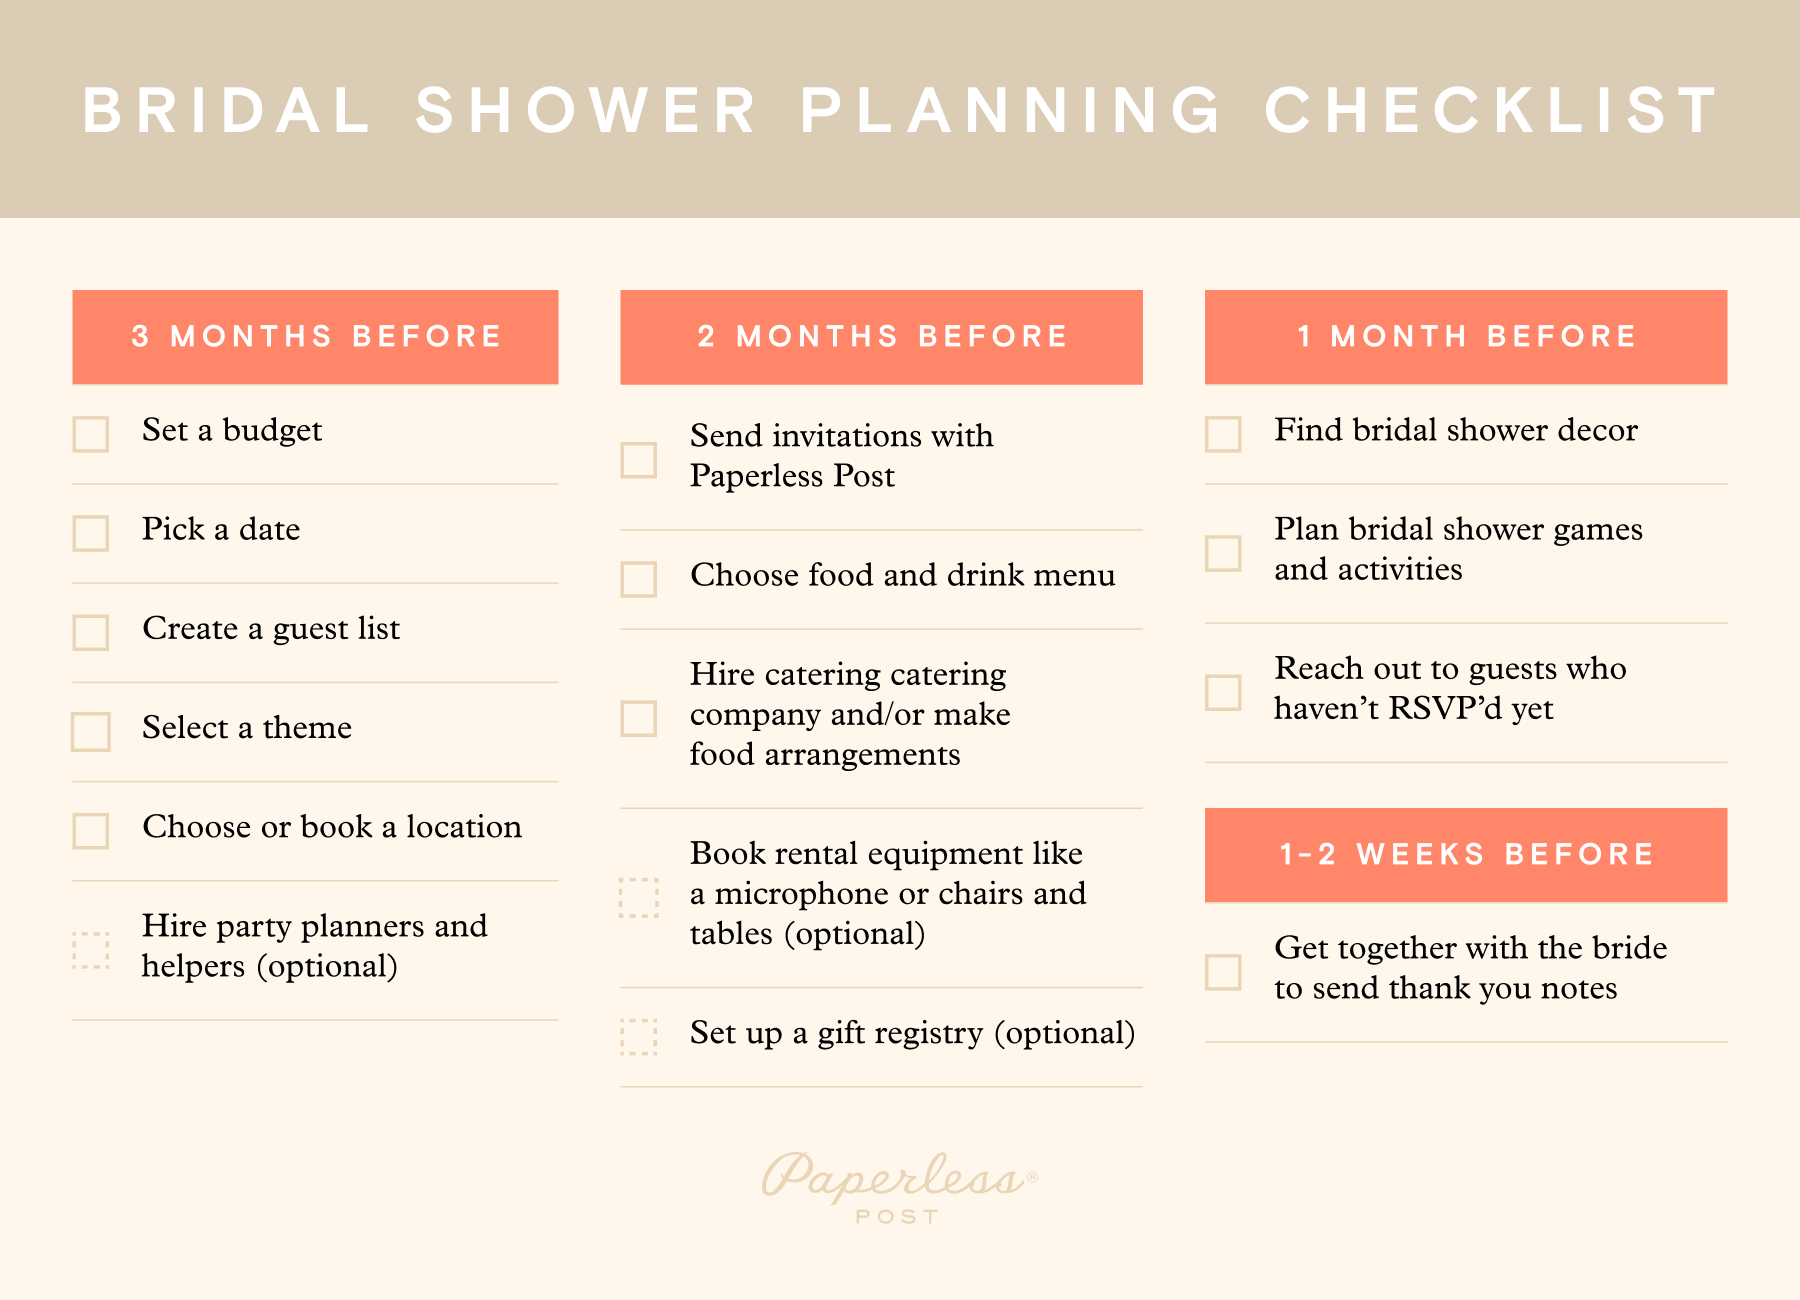 An infographic of a bridal shower planning checklist, as outlined below.